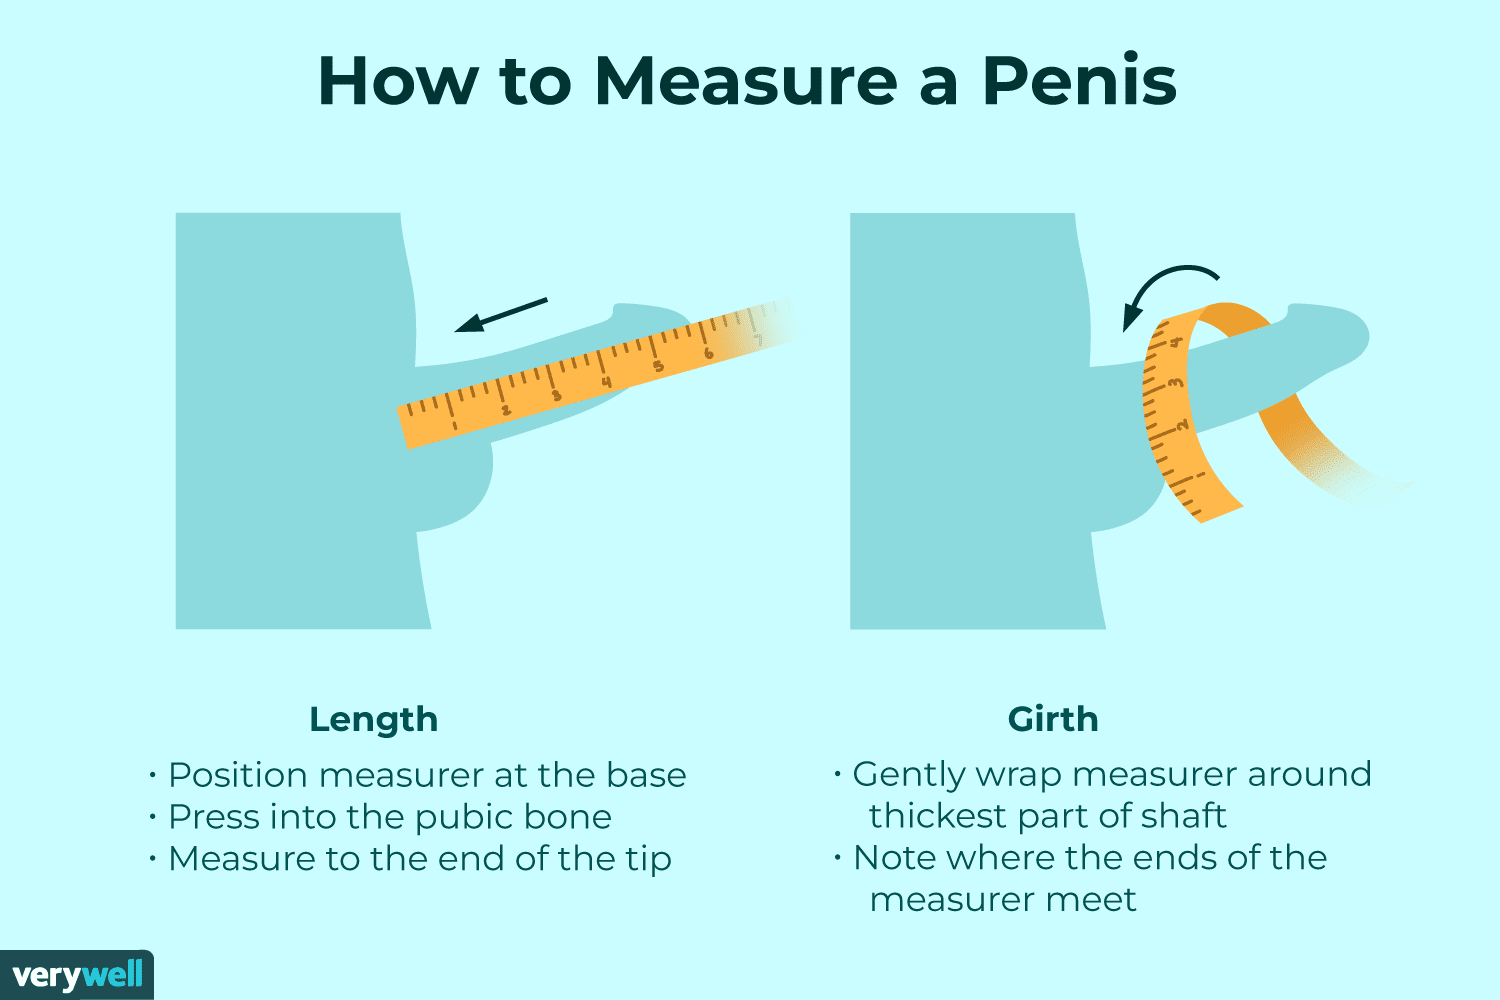 christine m tran recommends 7 inch circumference penis pic